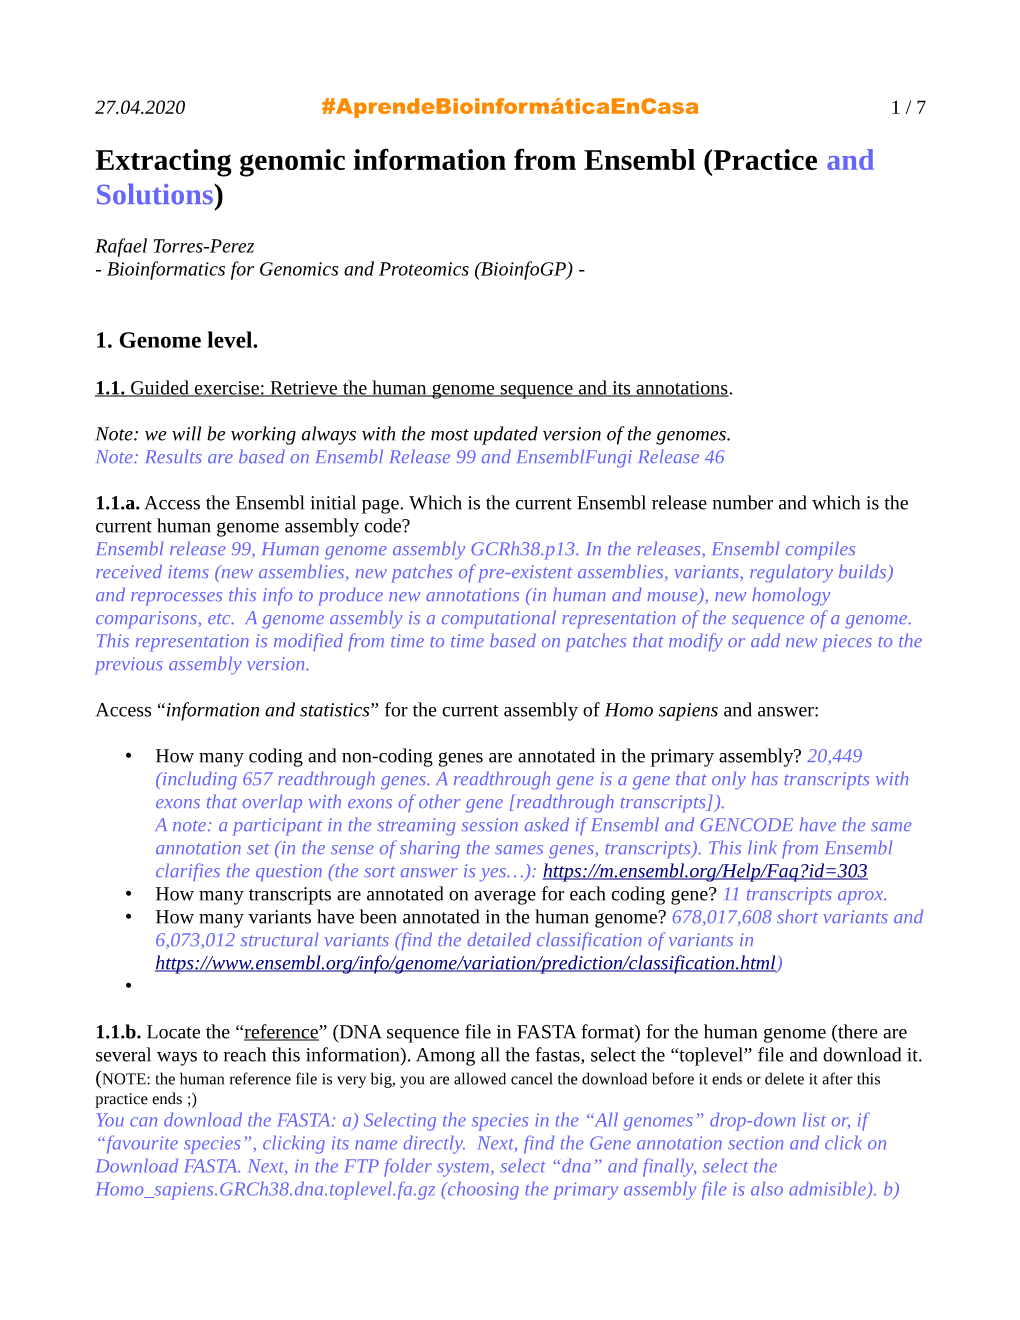 Extracting Genomic Information from Ensembl (Practice and Solutions)